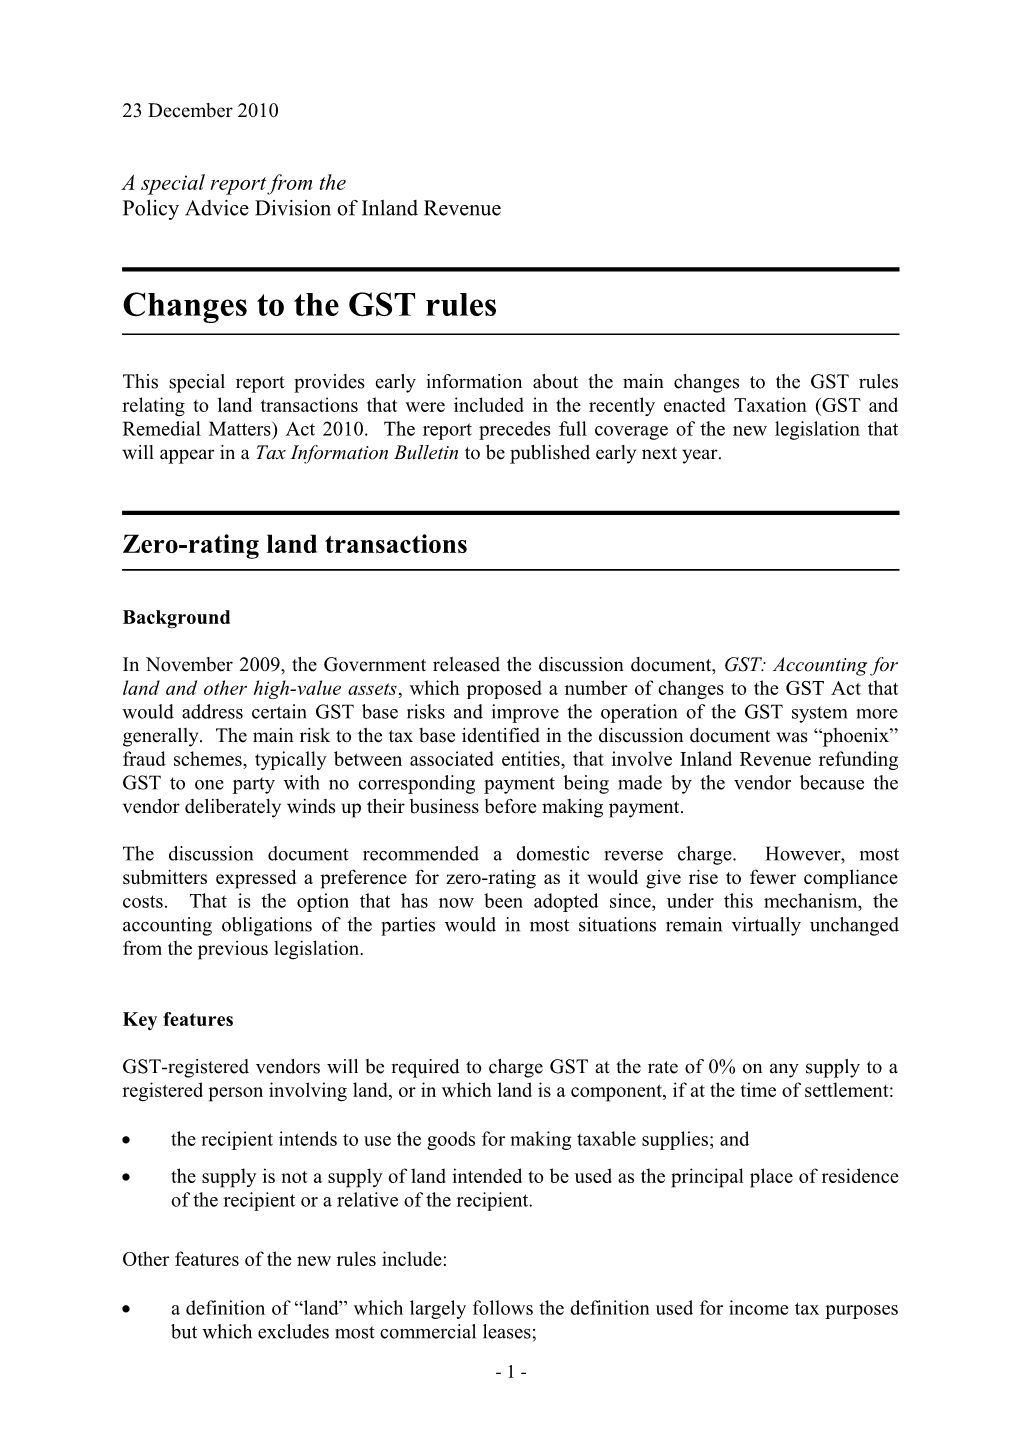 Special Report: Changes to the GST Rules